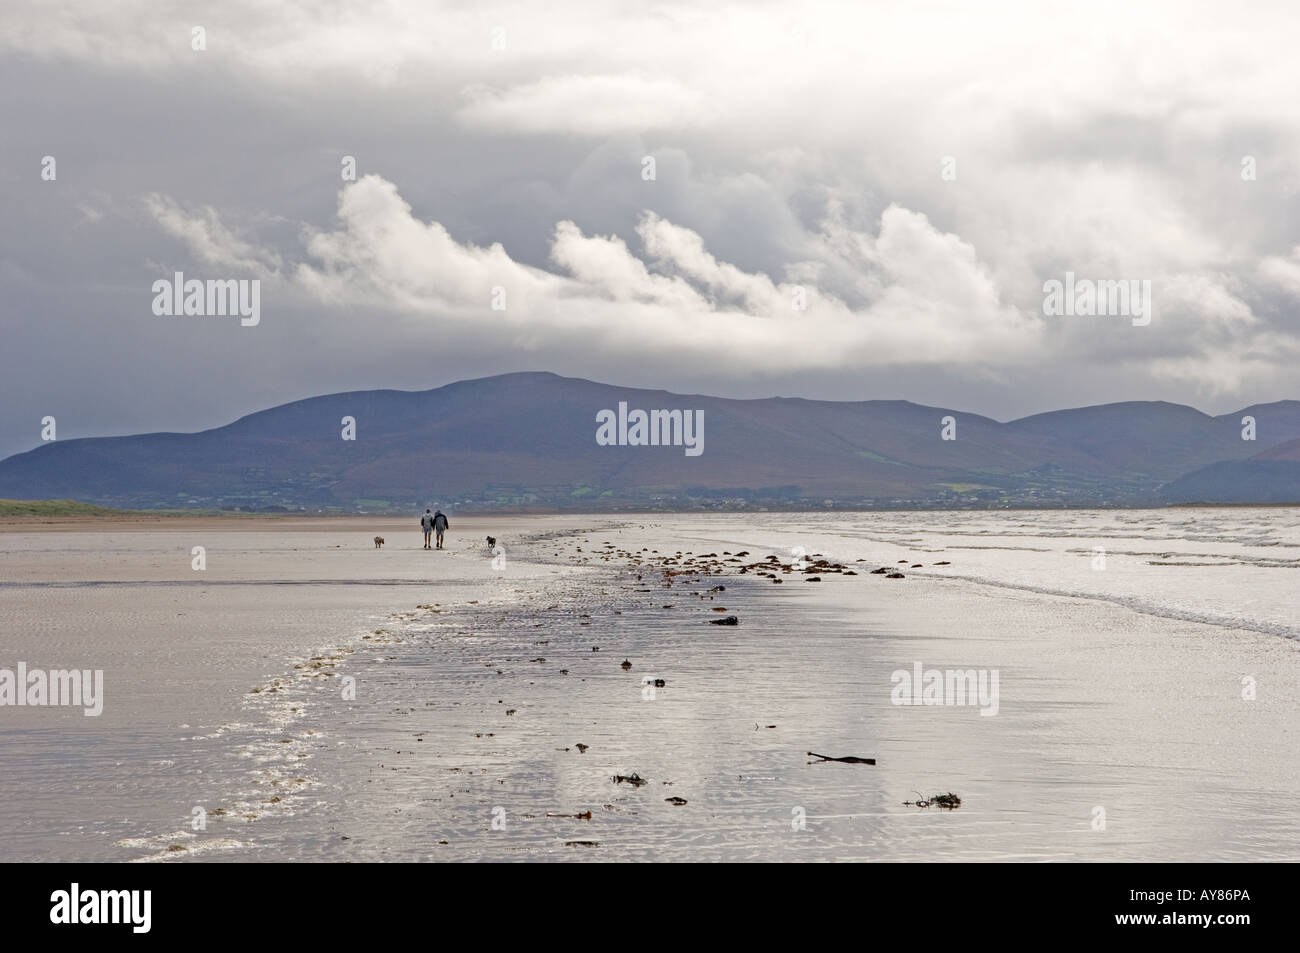 Inch Strand, County Kerry, Ireland.  Man woman and dog on beach with the mountains of the Ring of Kerry behind. Rainy day. Stock Photo